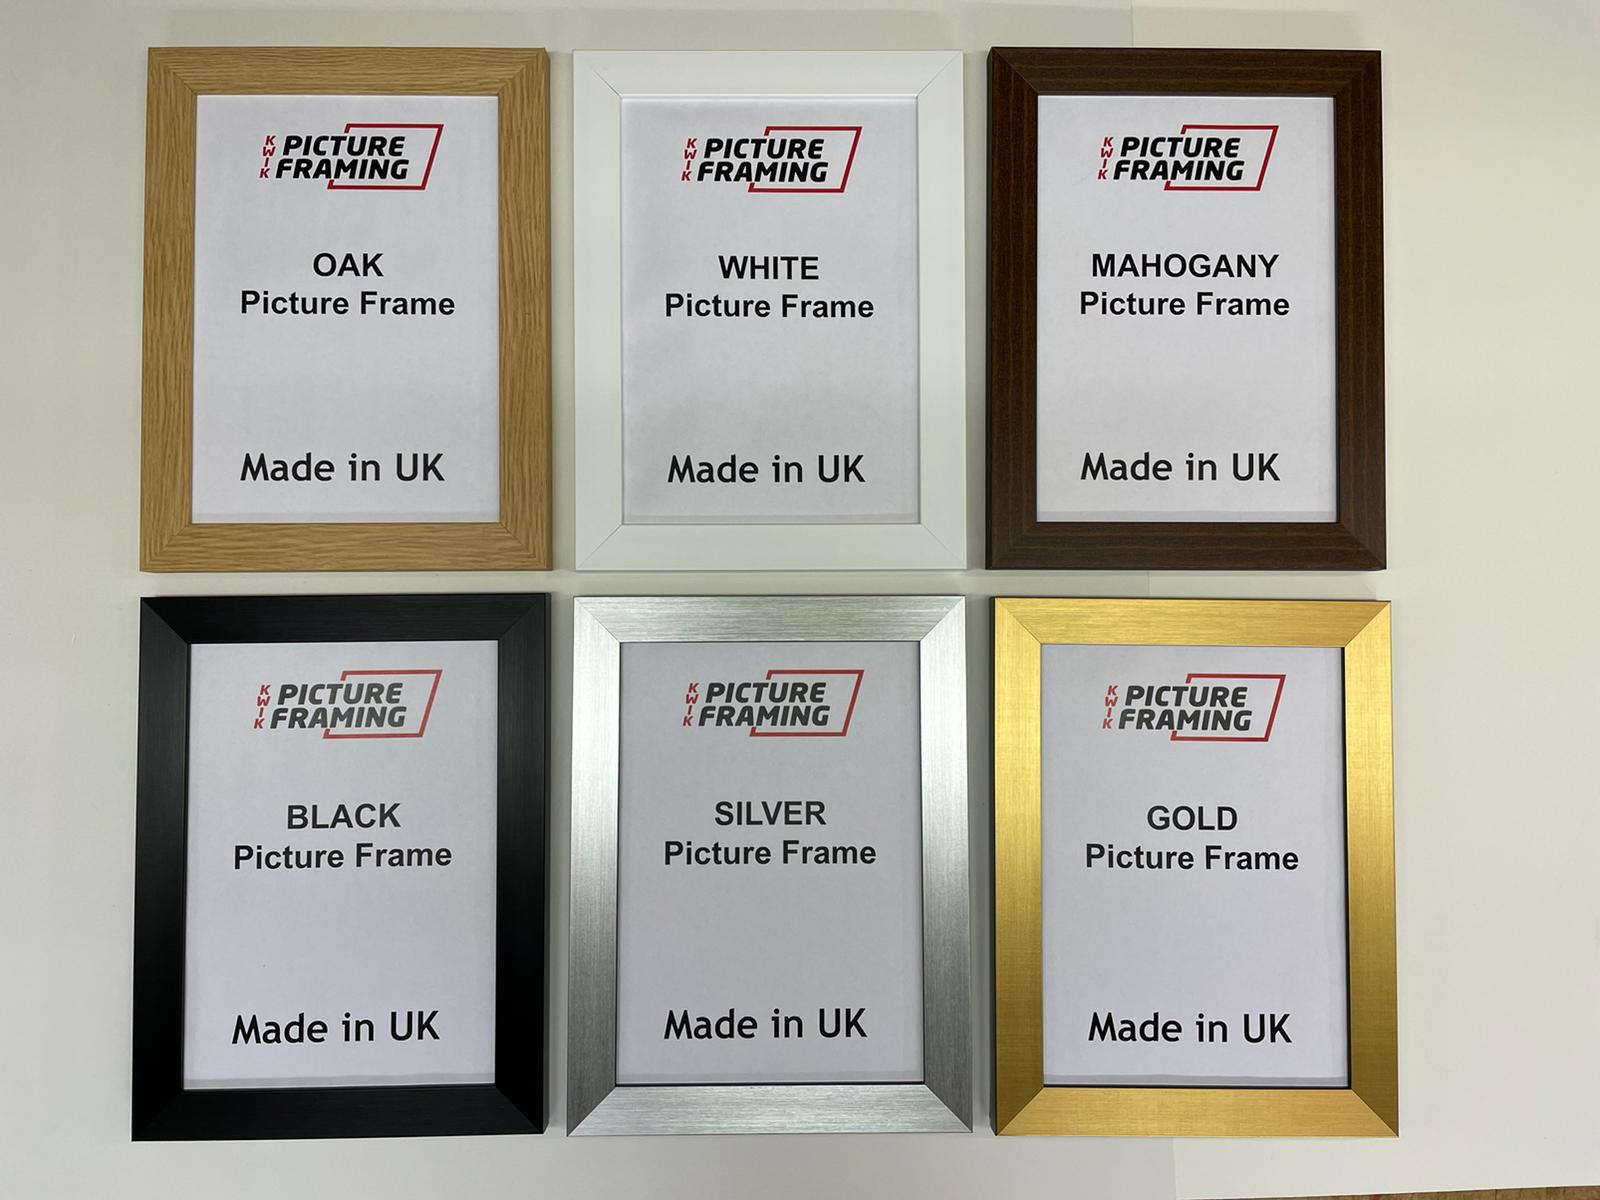 30mm wide Picture Frames in Wholesale Trade Prices in Packs of 6